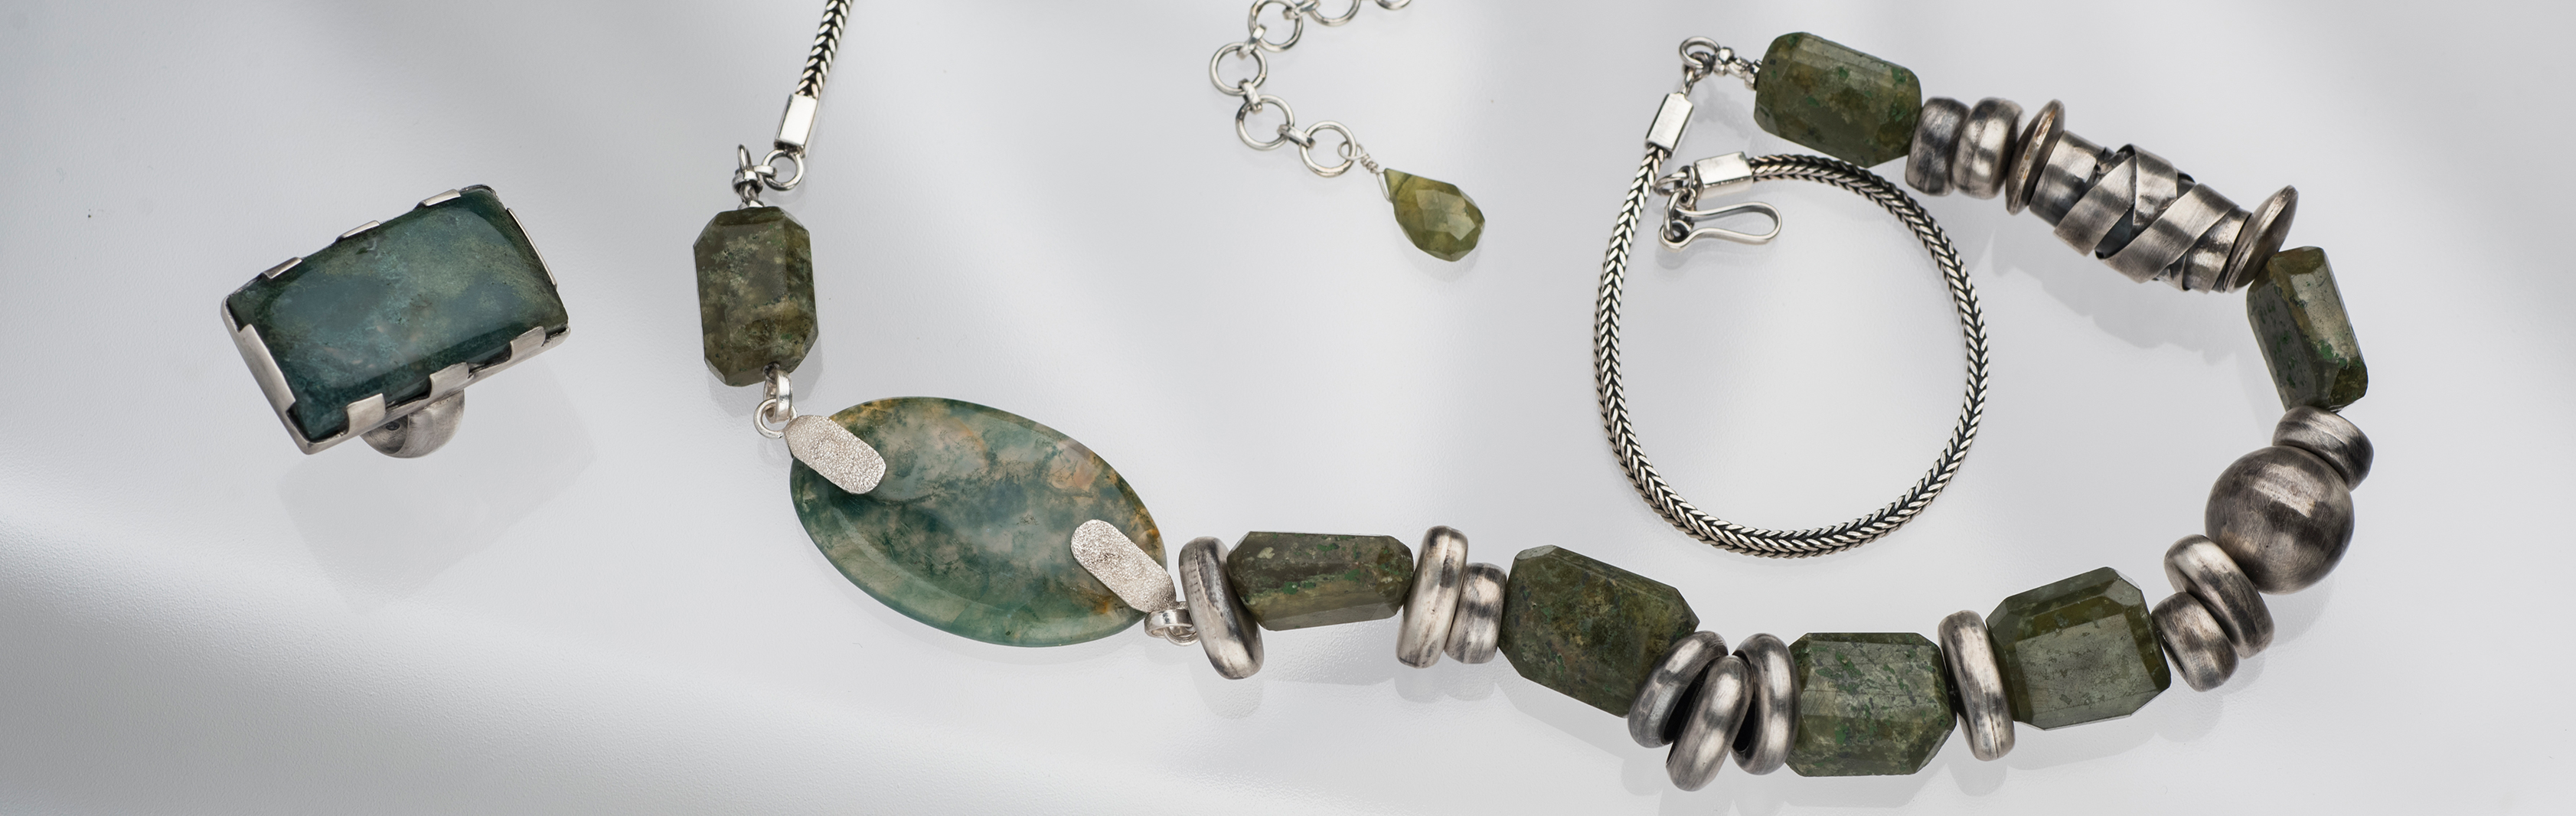 Rainforest Collection | Limited Edition 925 Sterling Silver Jewelry with Moss Agate